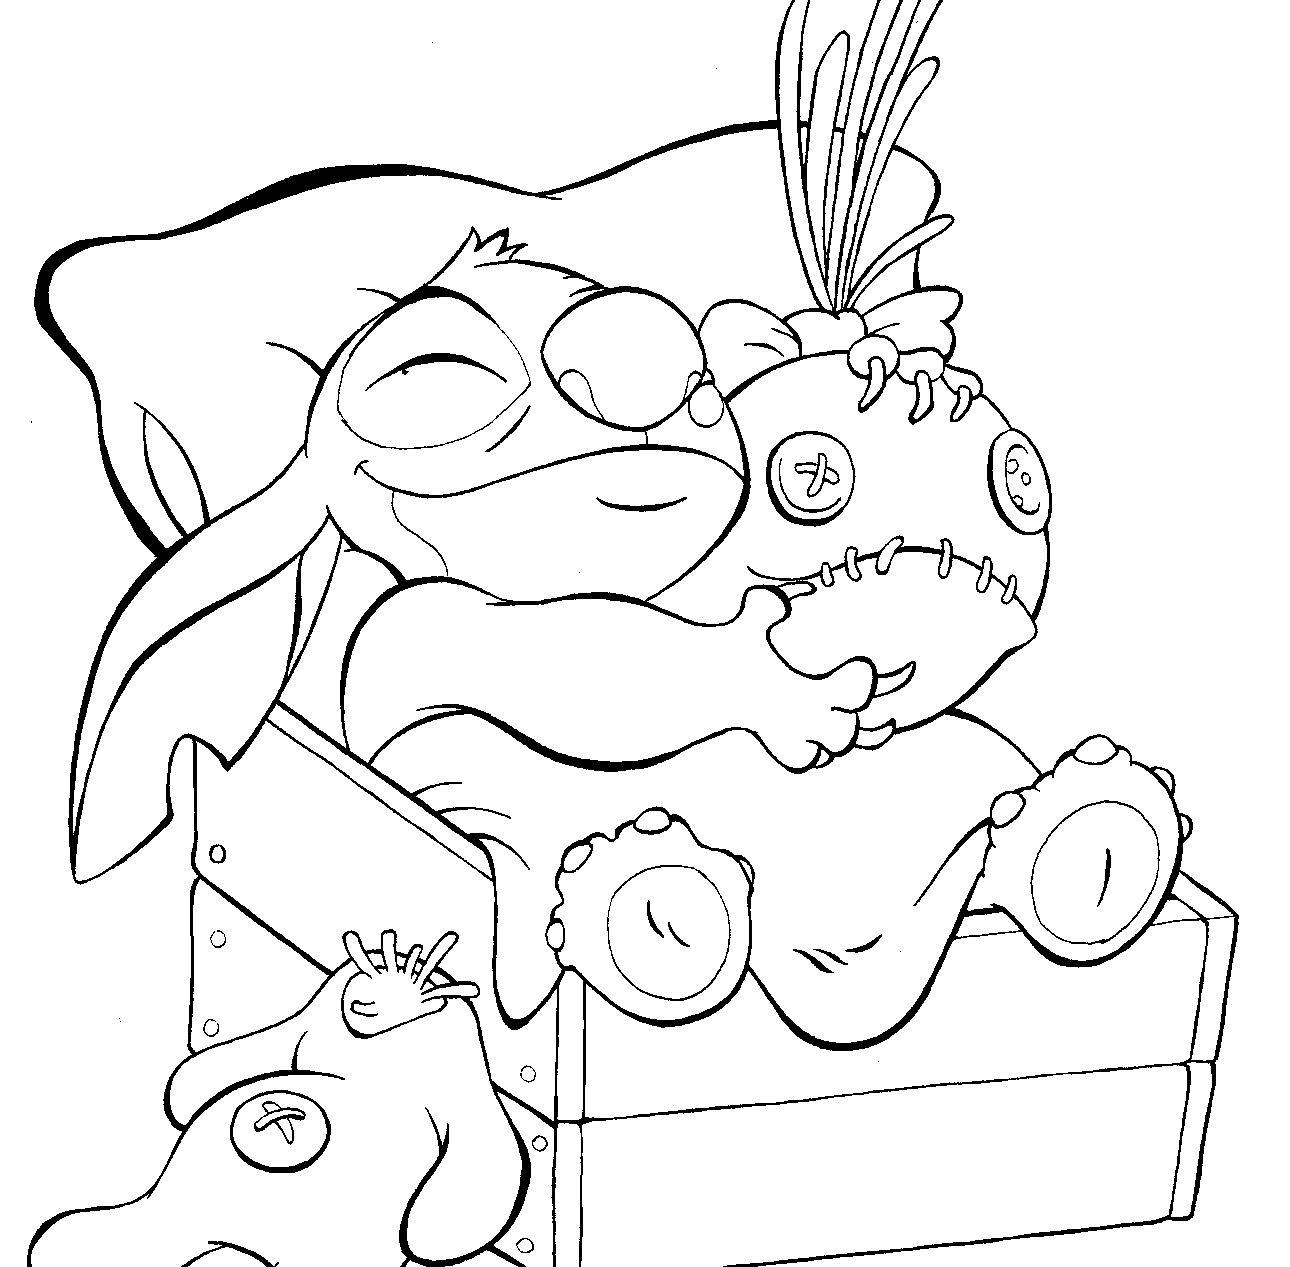 Free & Easy To Print Stitch Coloring Pages  Stitch coloring pages, Coloring  pages, Coloring book pages